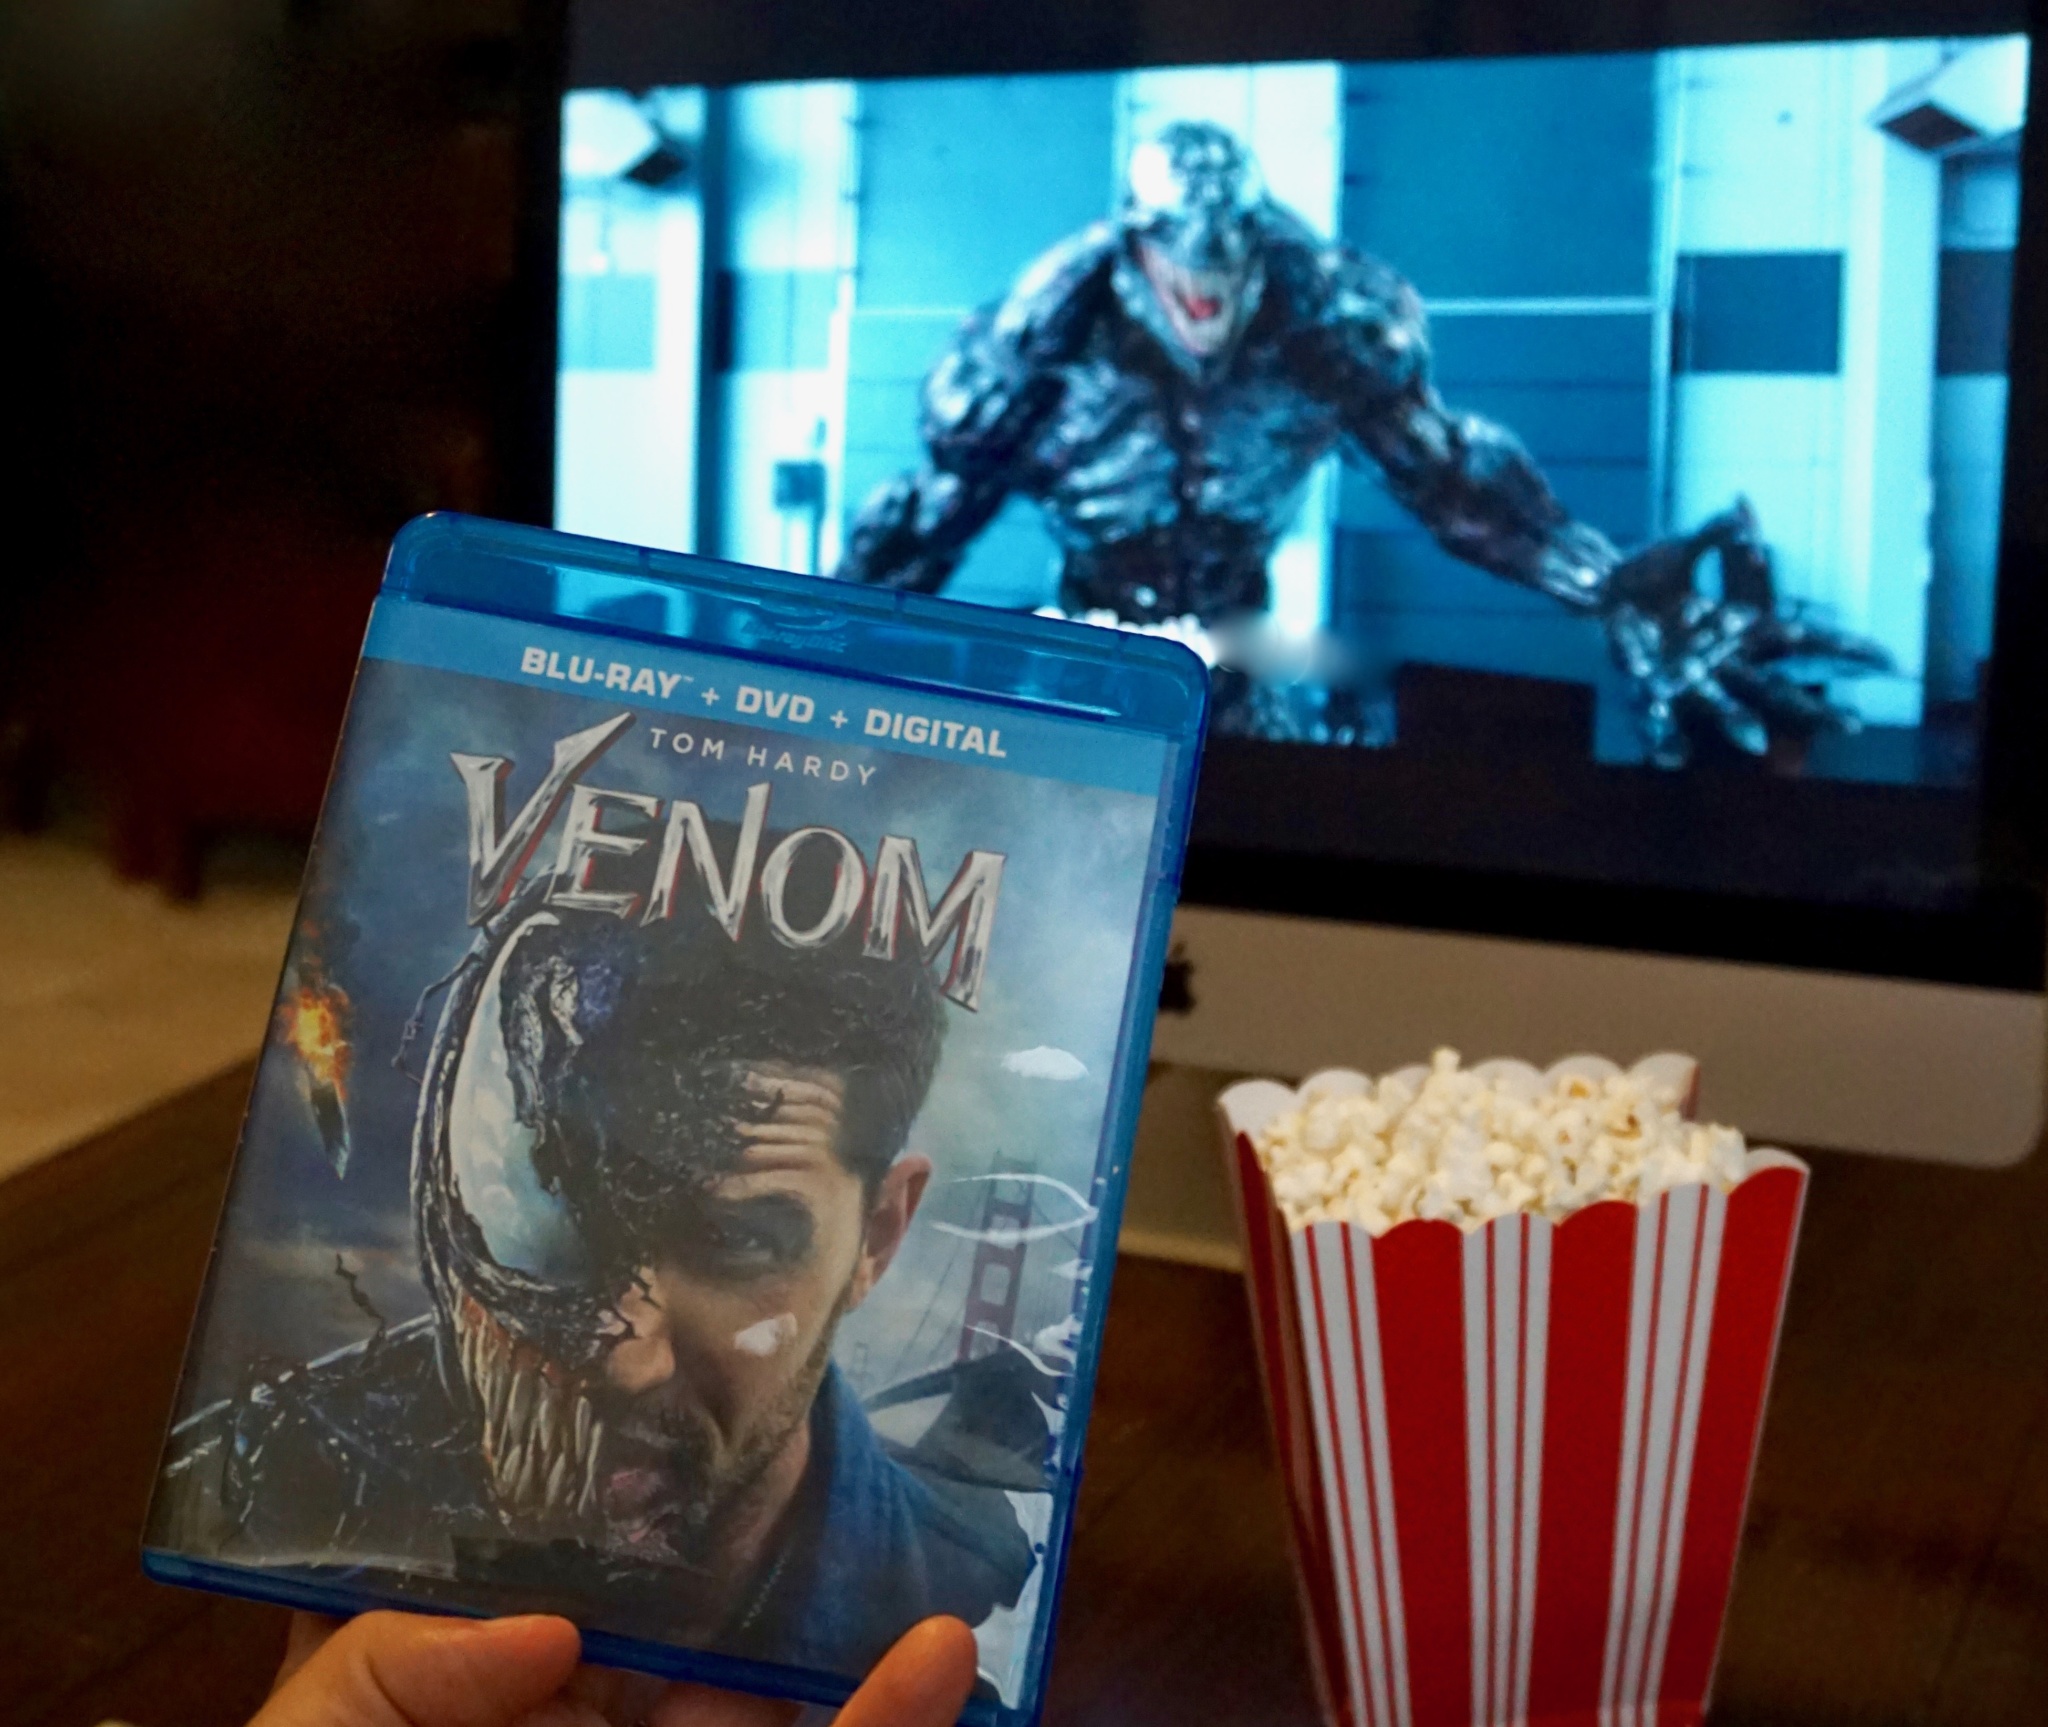 Why Venom the movie is awesome